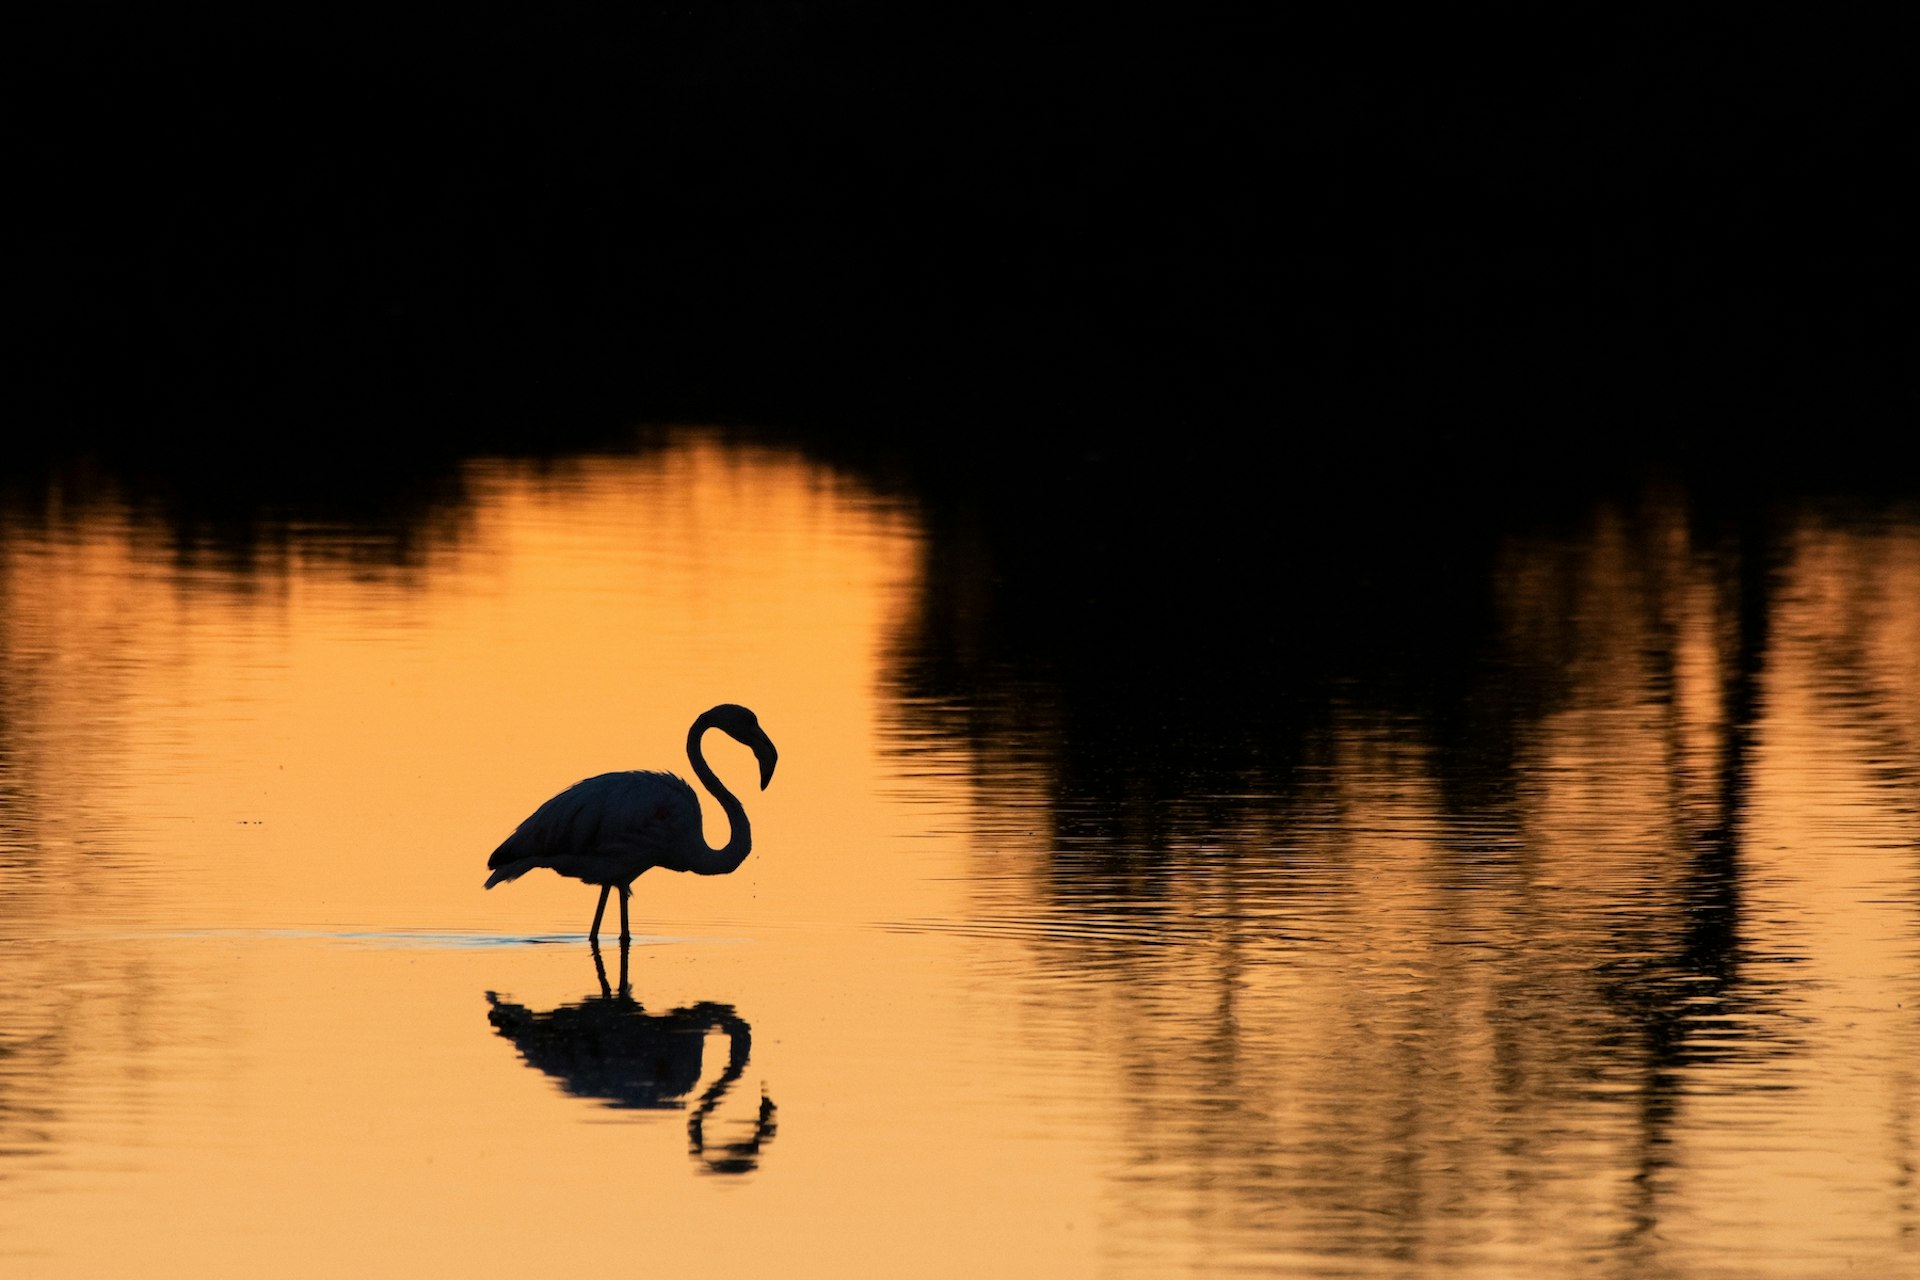 A flamingo silhouetted in the sunset light wades in the wetlands of Parque Natural da Ria Formosa